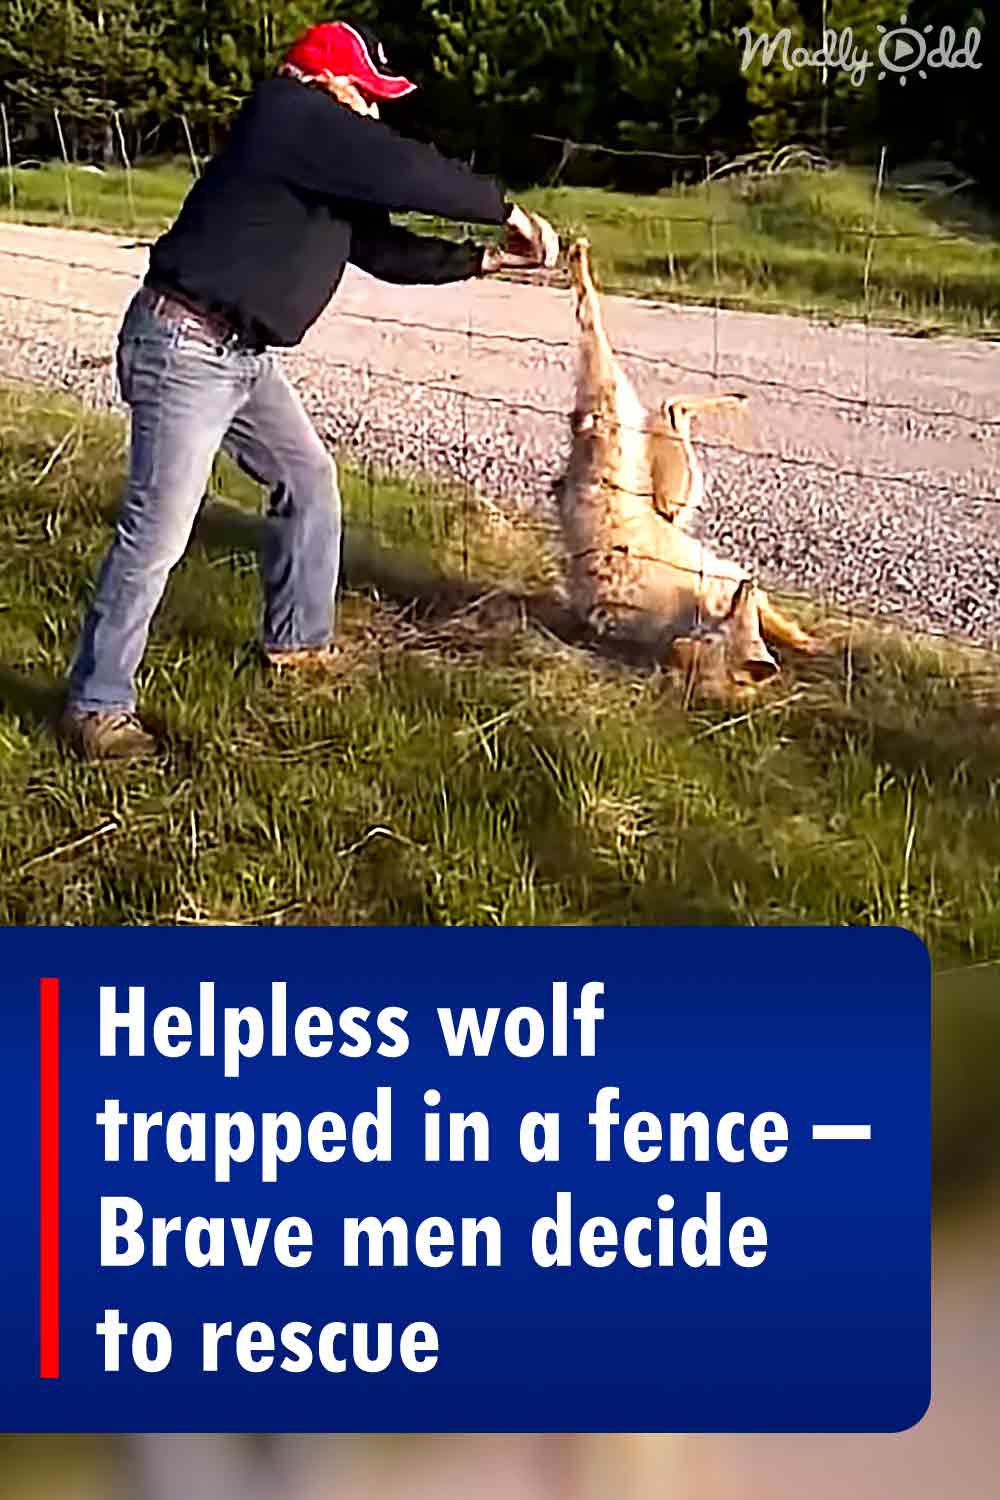 Helpless wolf trapped in a fence – Brave men decide to rescue